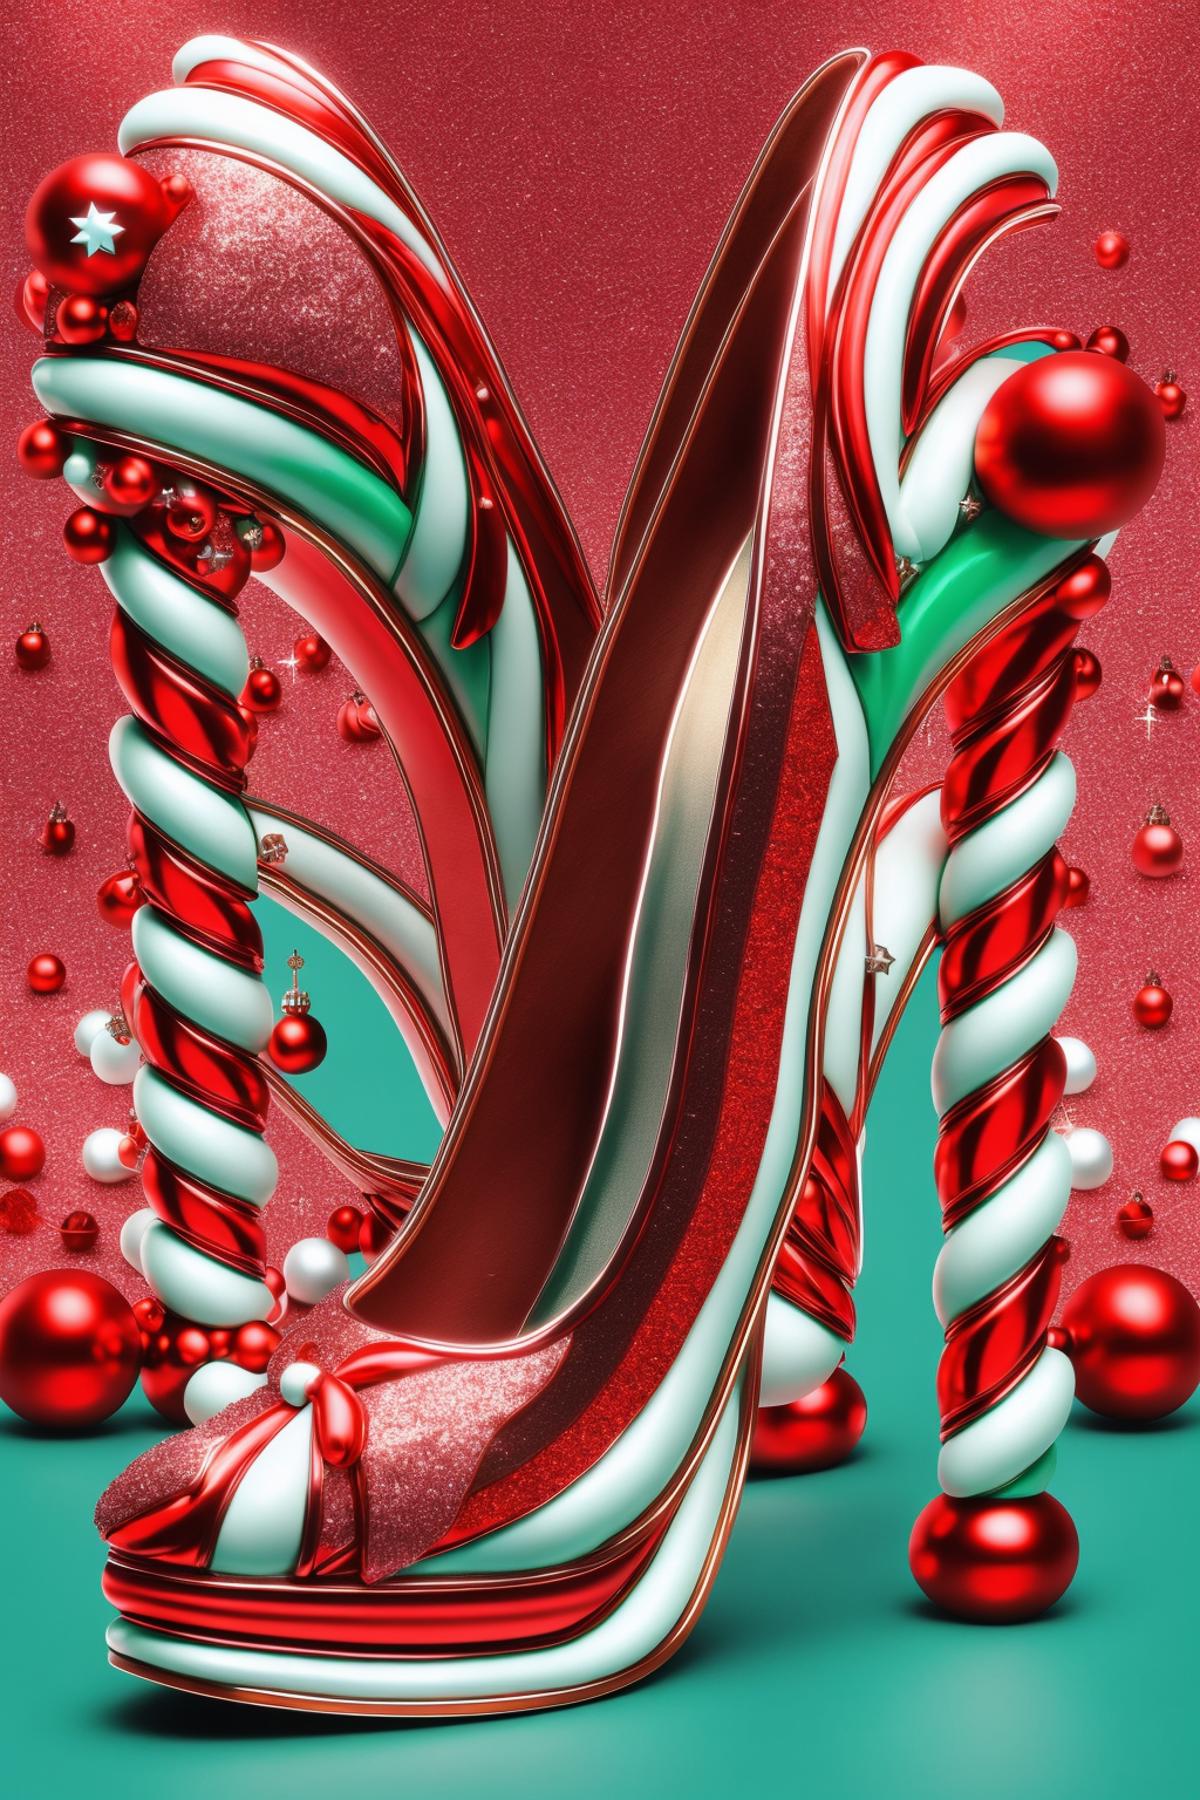 A Christmas-themed high heel with candy canes and ornaments.